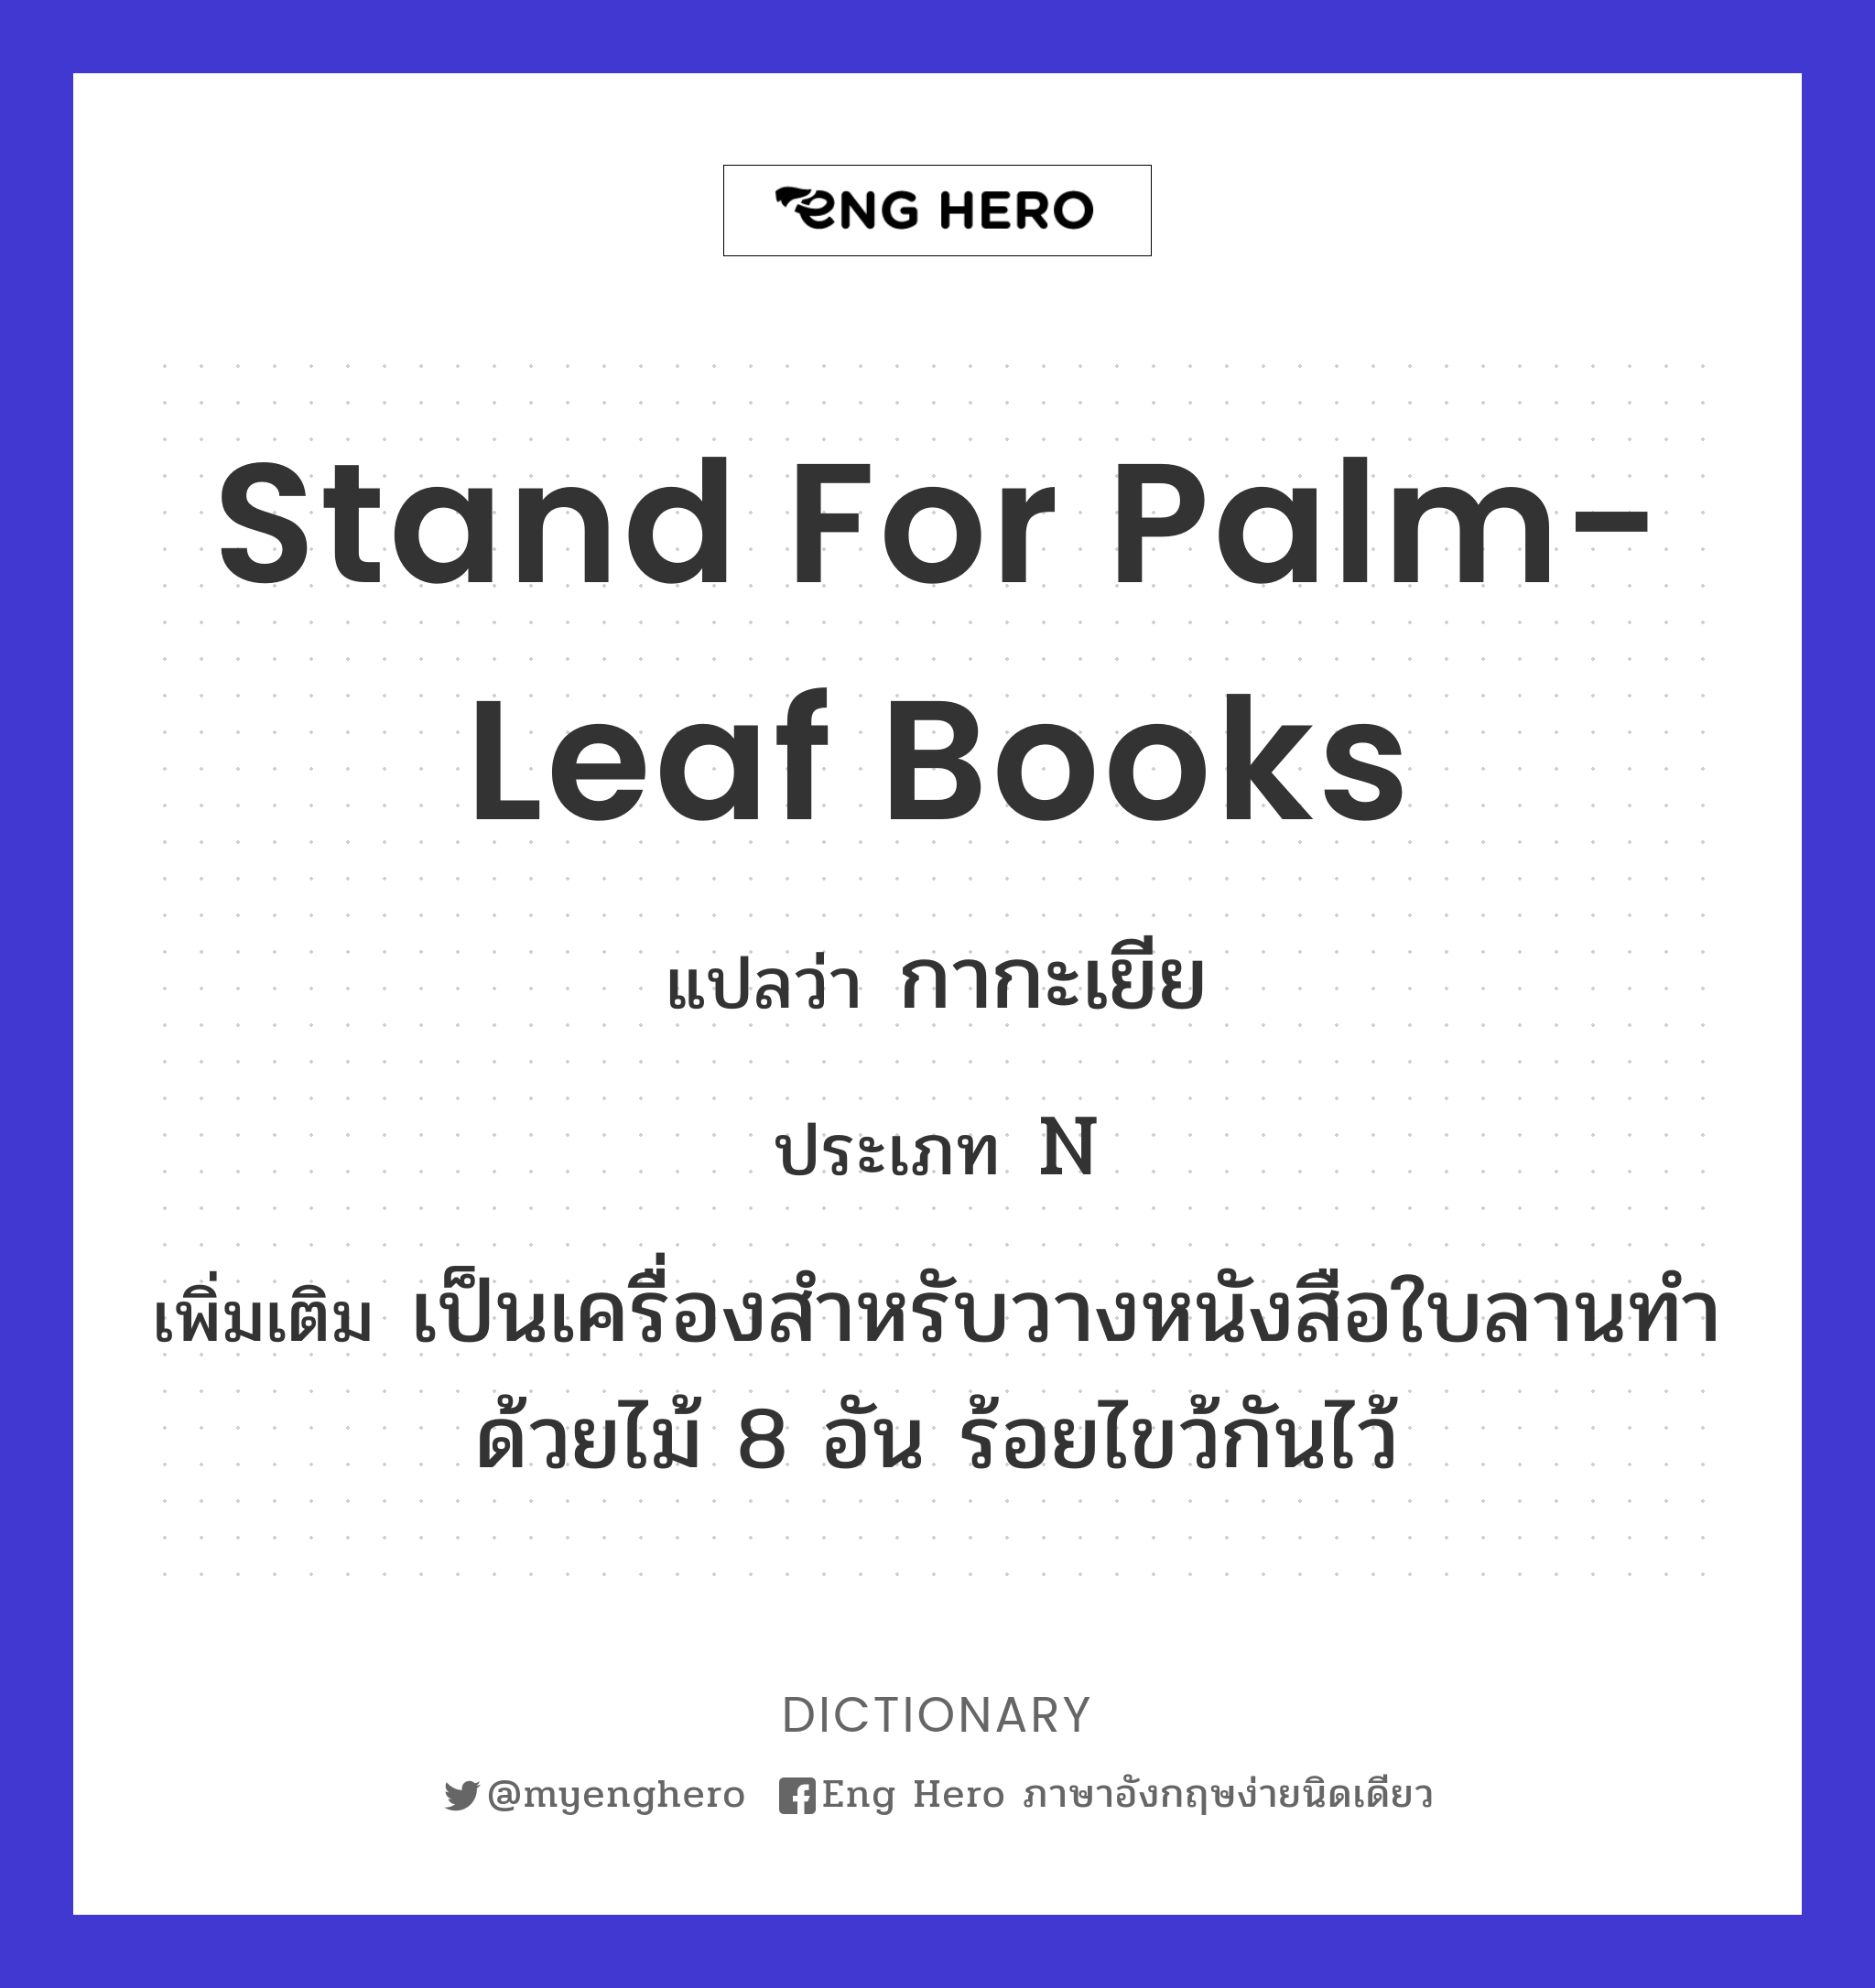 stand for palm-leaf books